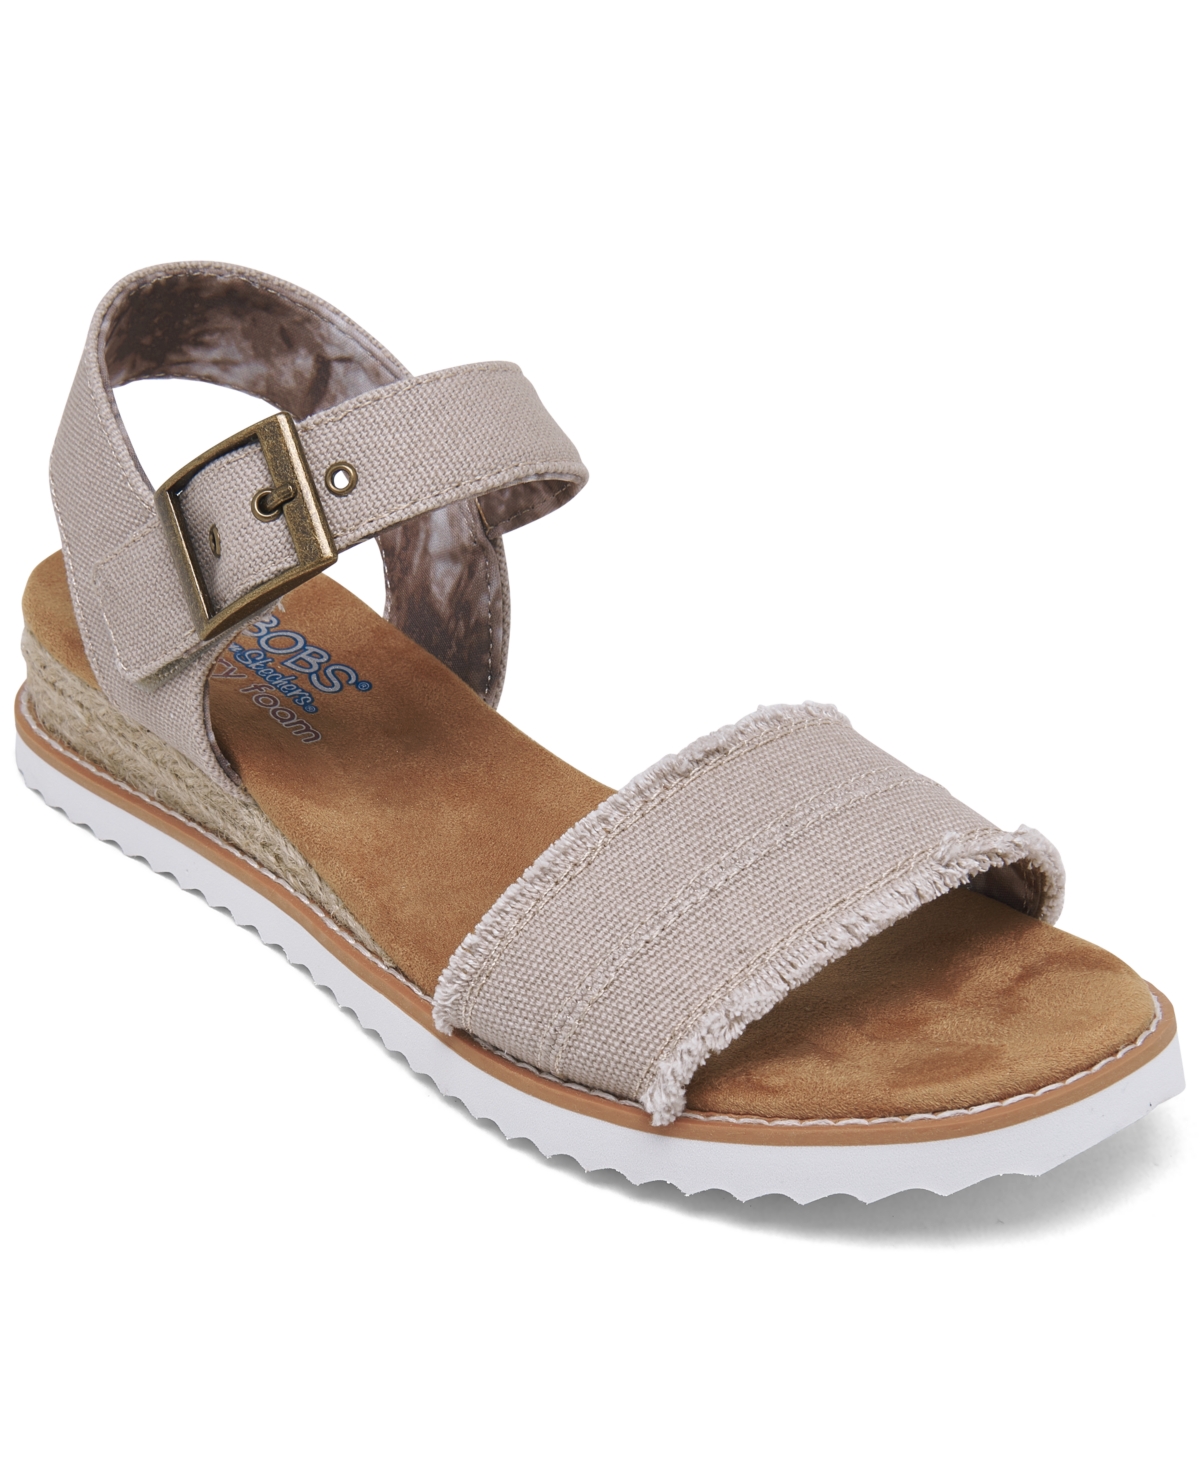 Women's Bobs Desert Kiss - Adobe Princess Strappy Sandals from Finish Line - Taupe